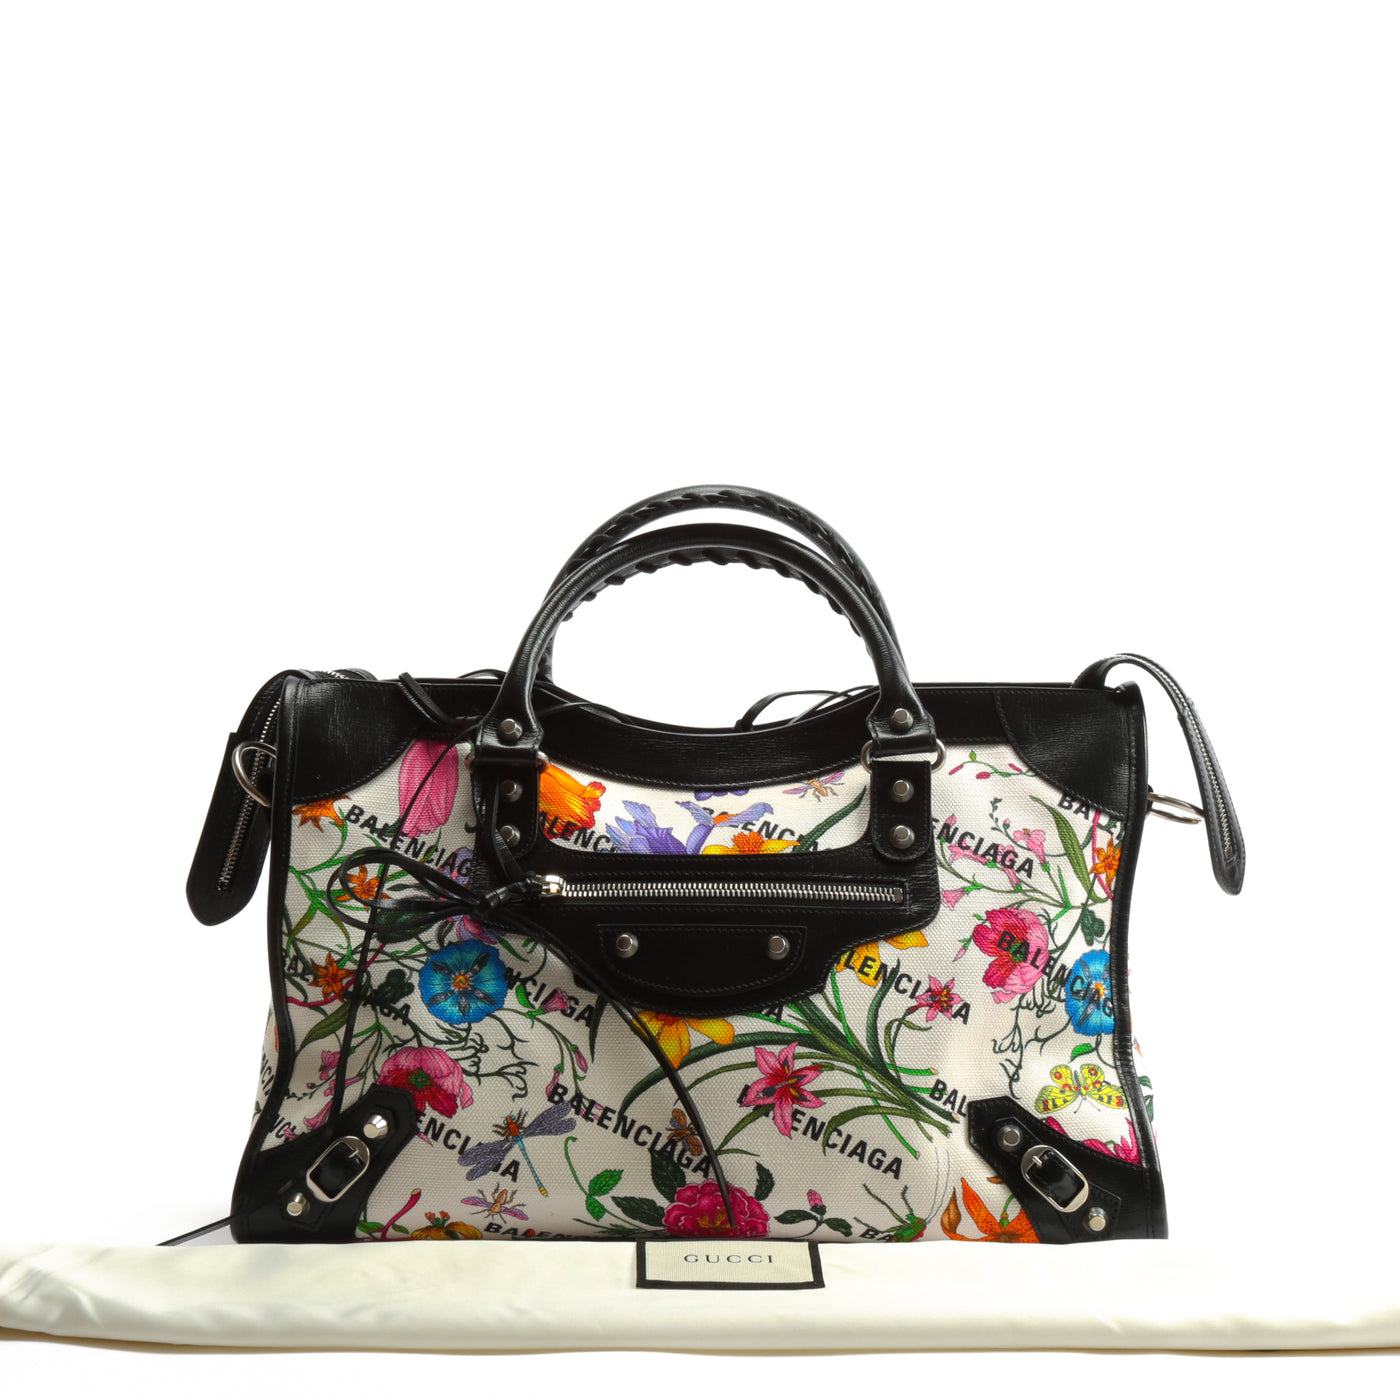 Guccis Innovative The Hacker Project Has Arrived  PurseBlog